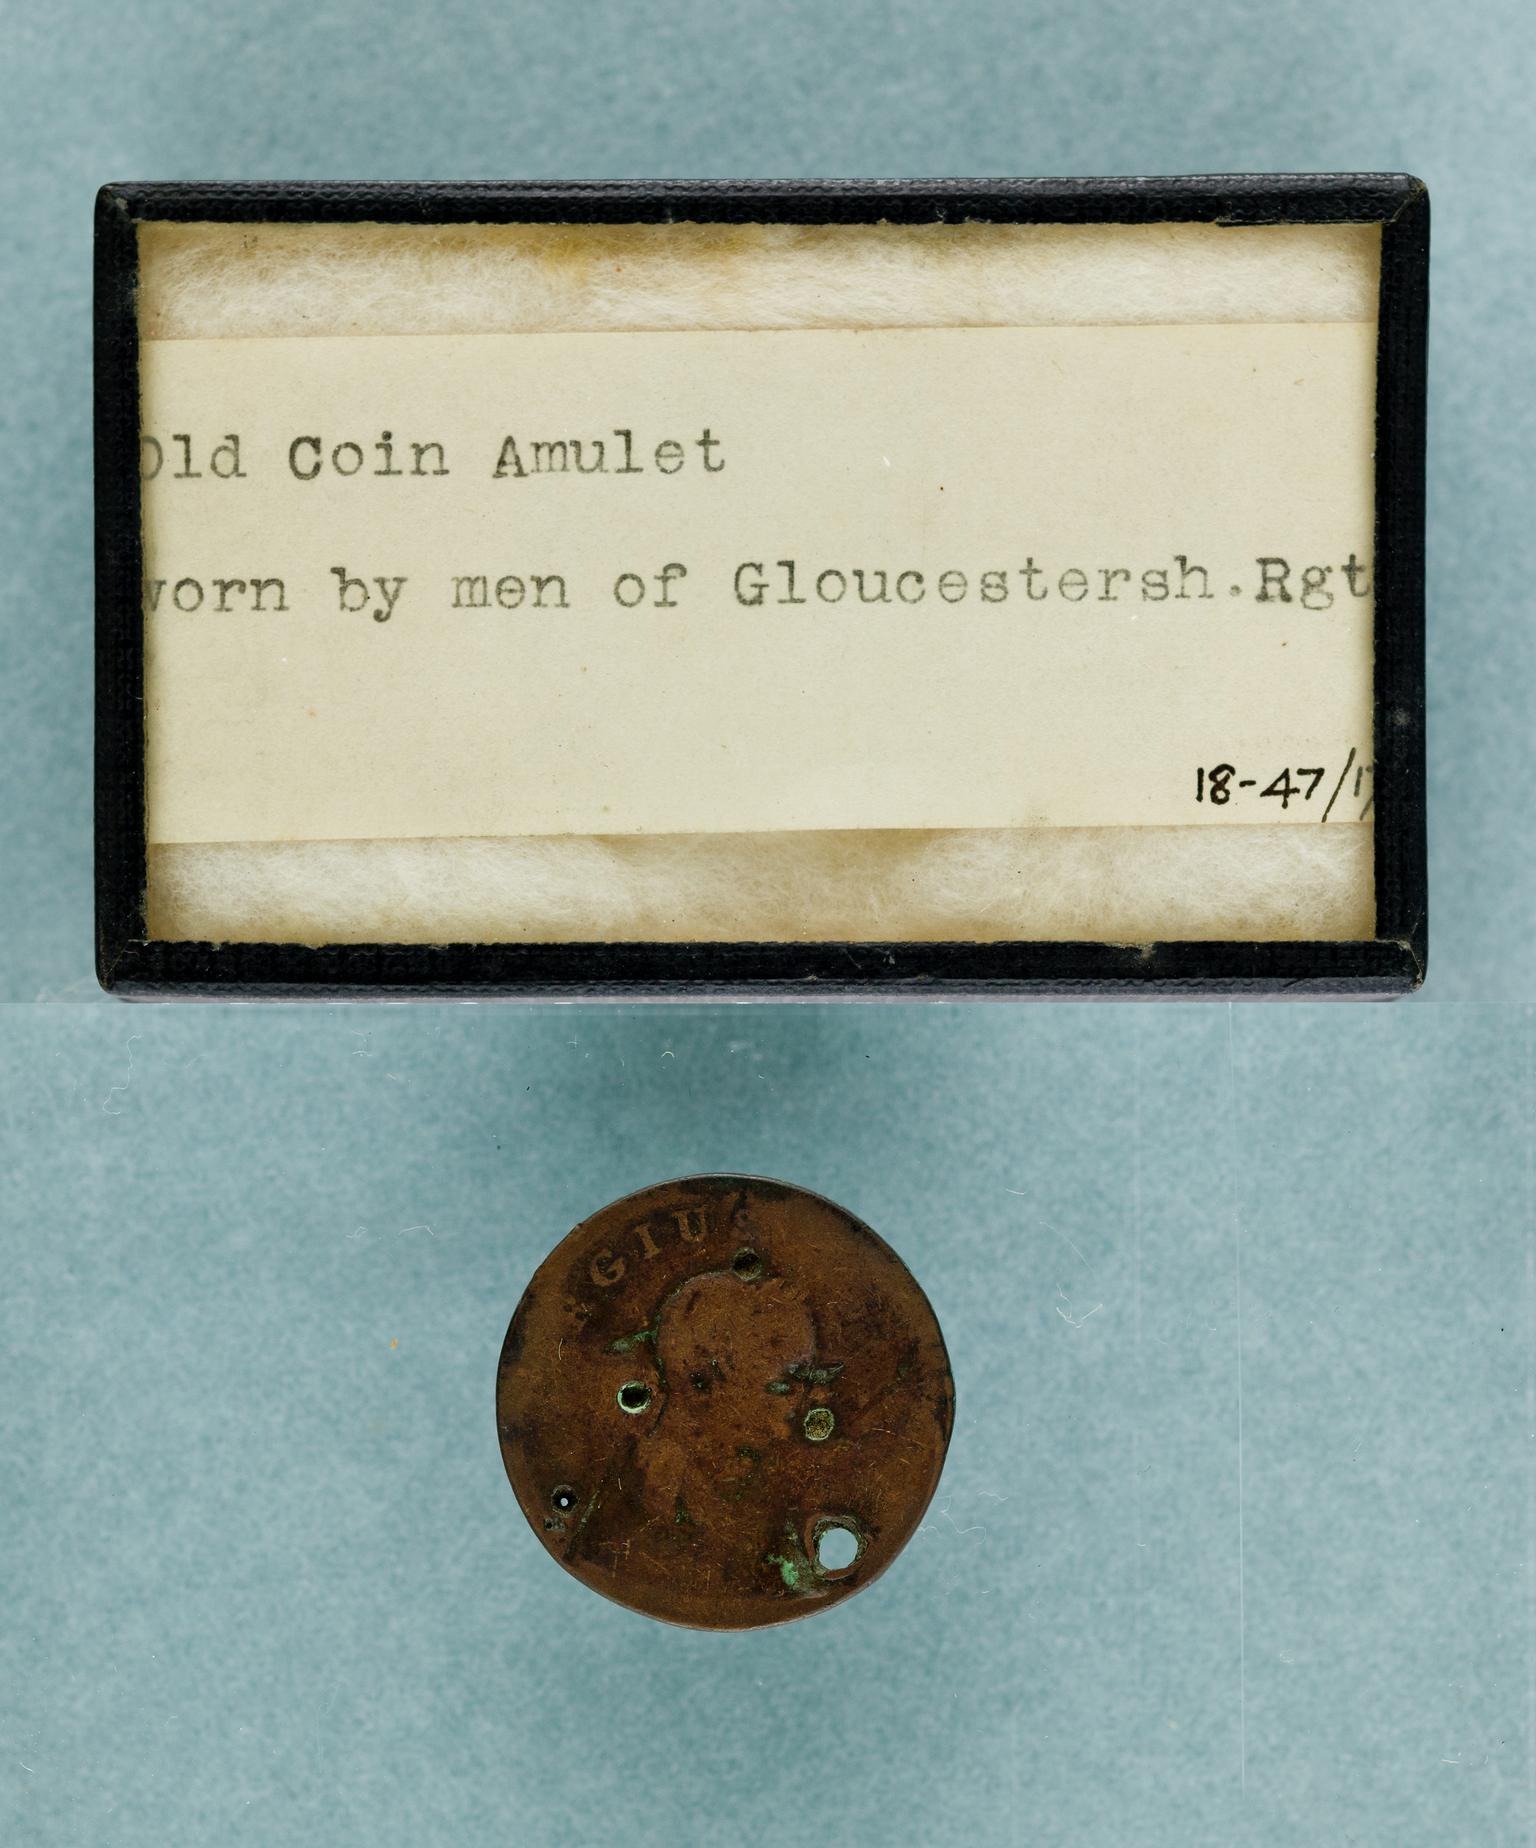 Coin amulet